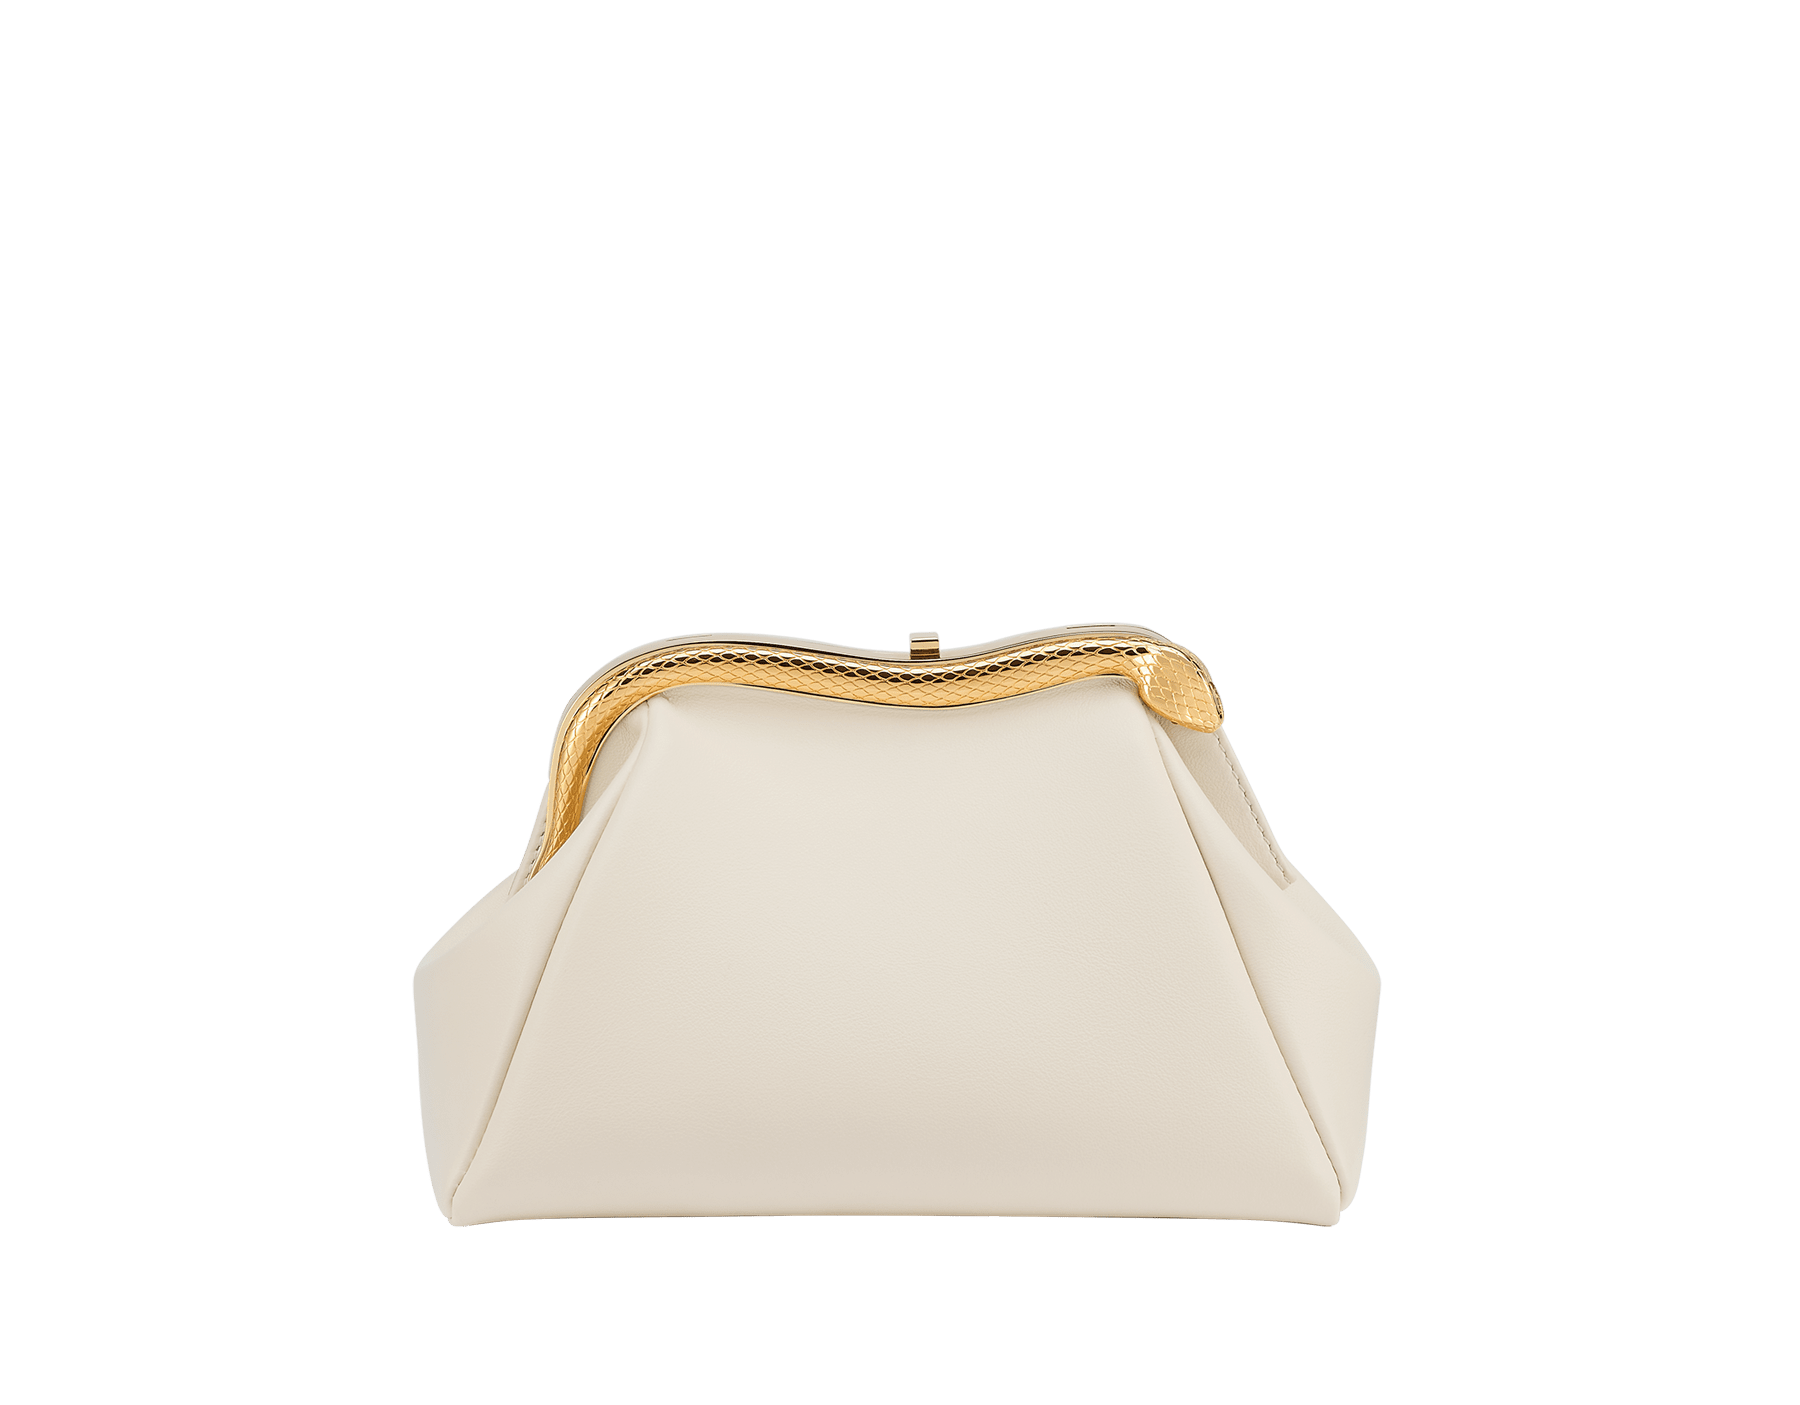 Serpentine small pouch in ivory opal smooth calf leather with black nappa leather lining. Captivating snake body-shaped frame in gold-plated brass embellished with engraved scales and red enamel eyes on one side and an ivory opal smooth calf leather insert on the other, and a press button closure. SEA-1239 image 1